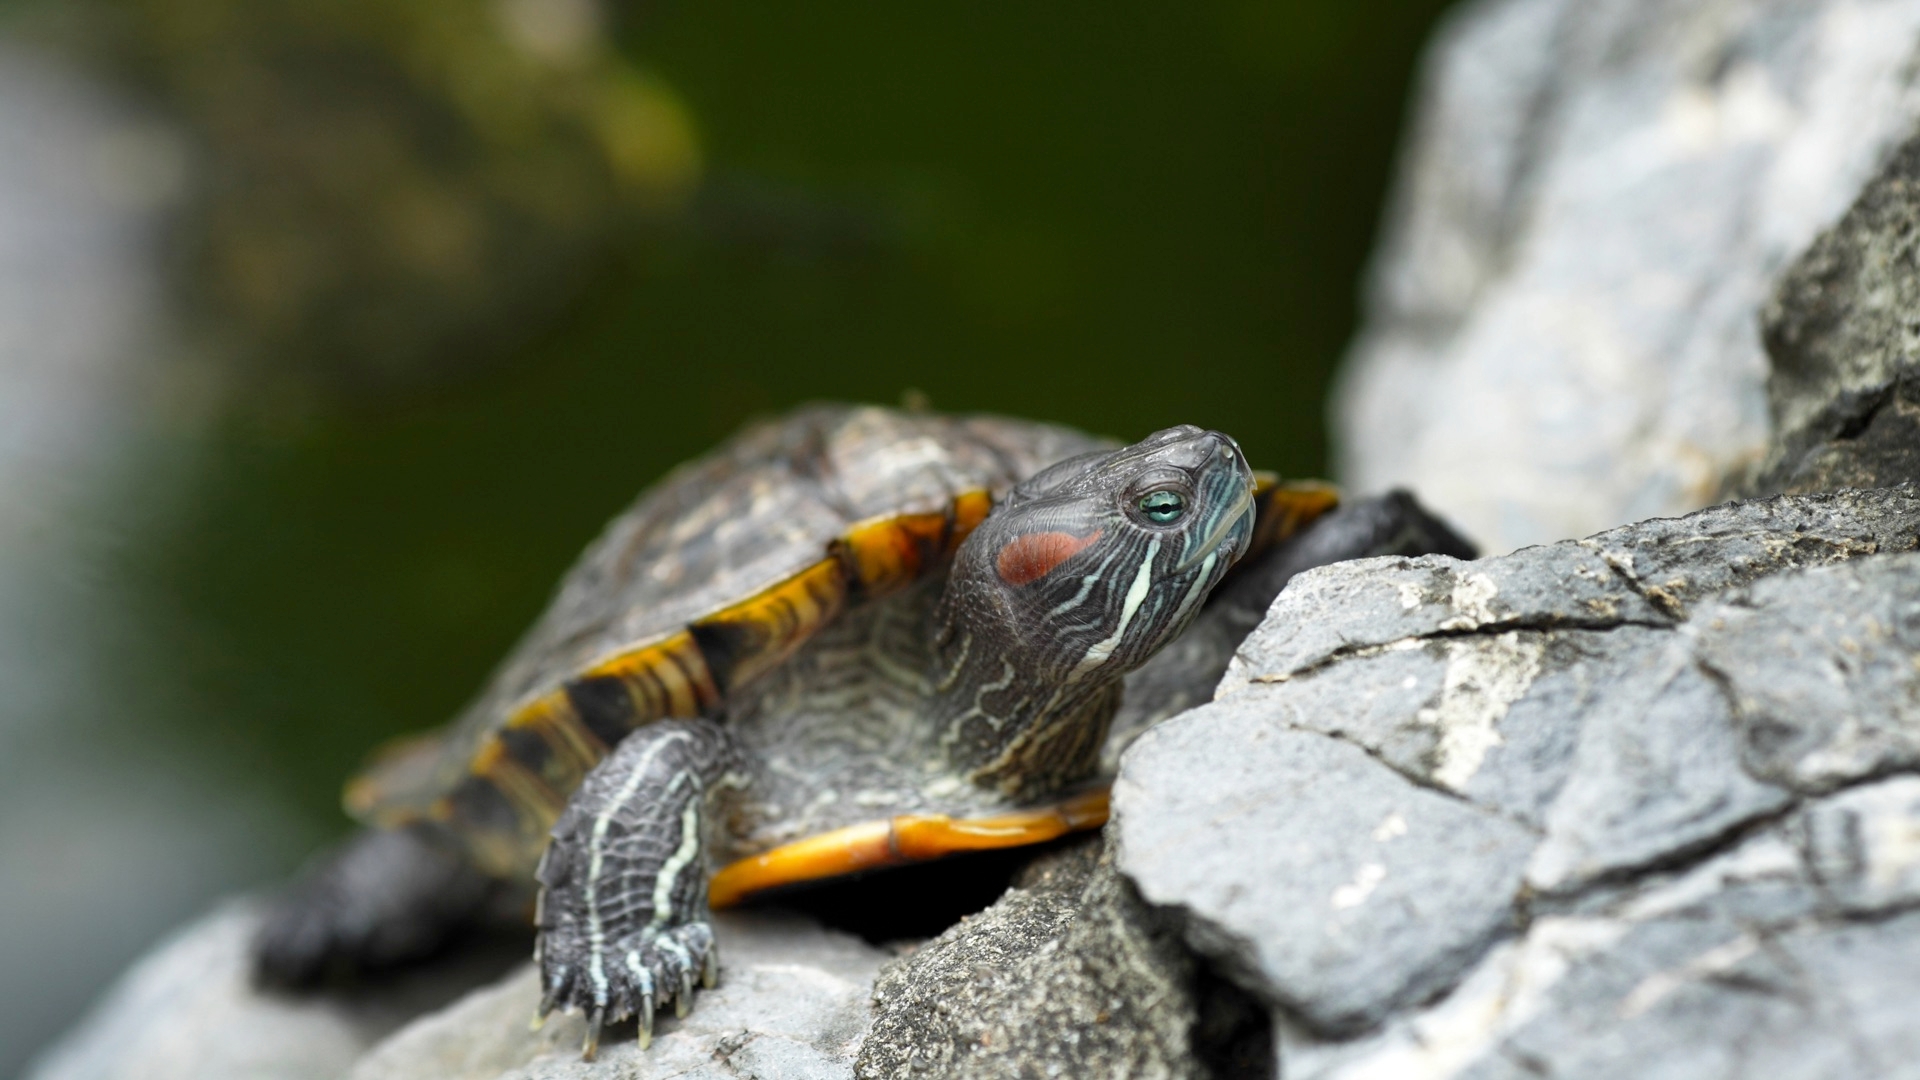 Pet Turtles, Cute But Commonly Contaminated With Salmonella